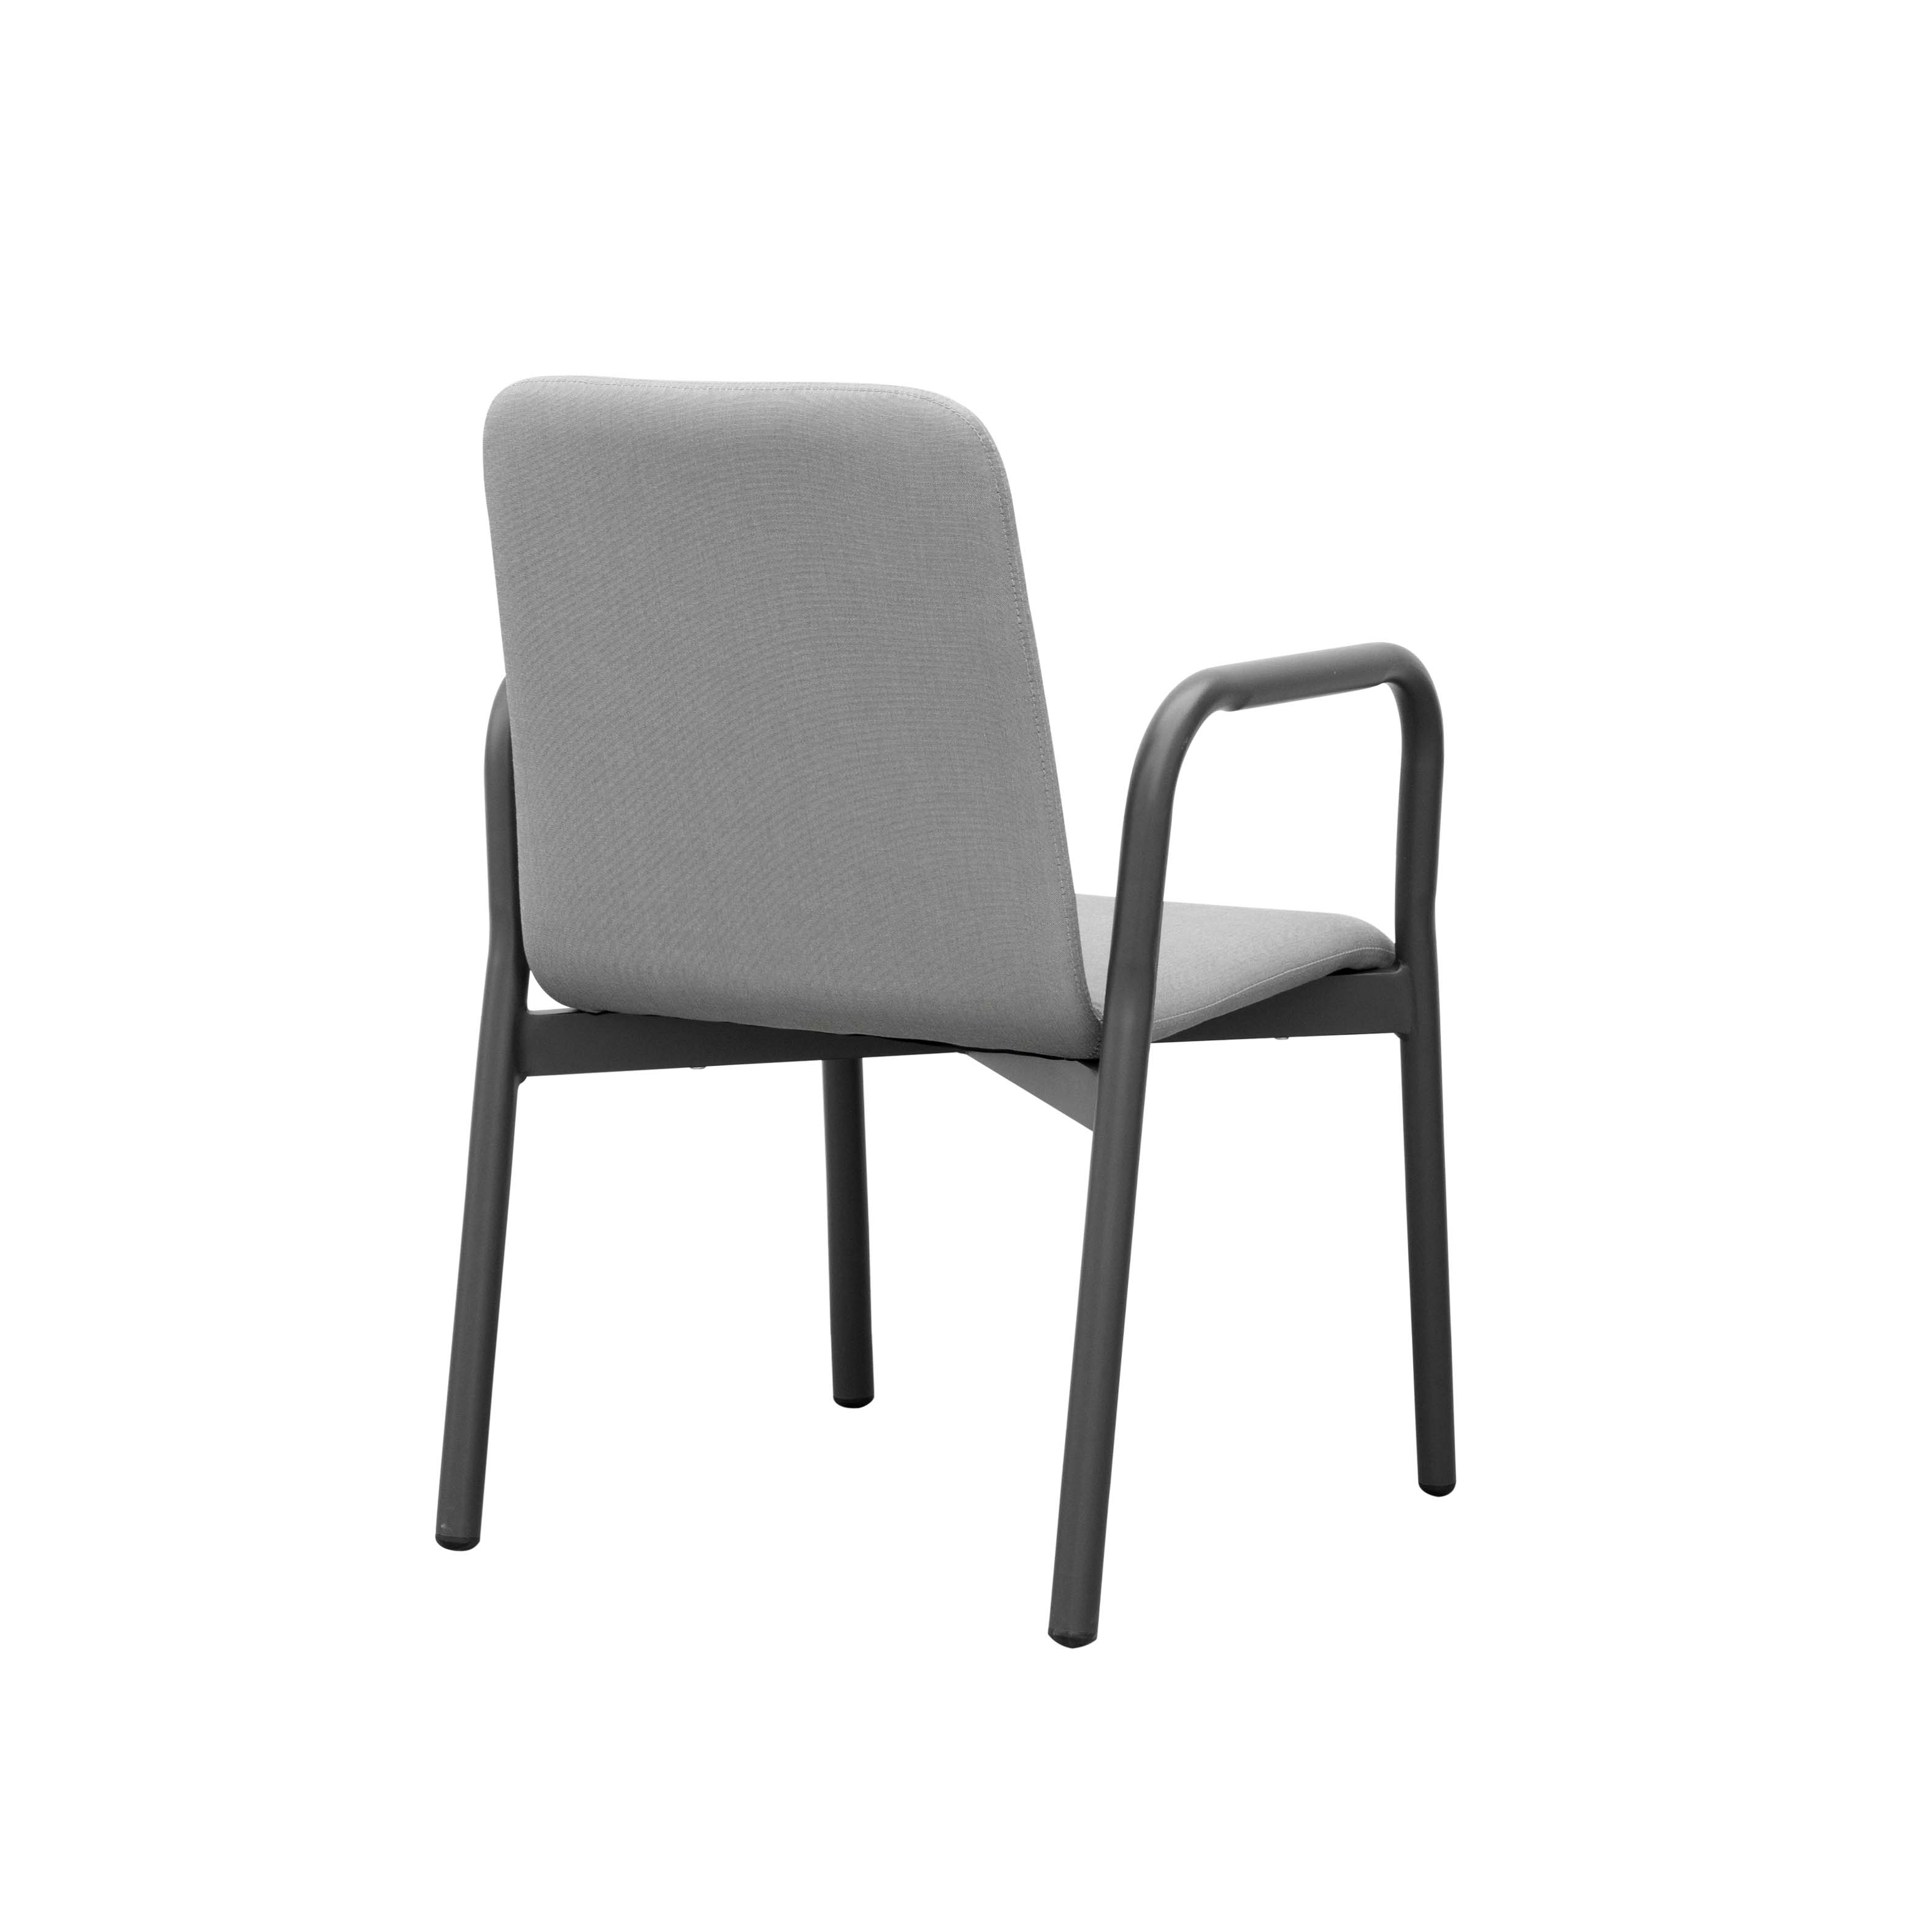 Houston fabric dining chair S5